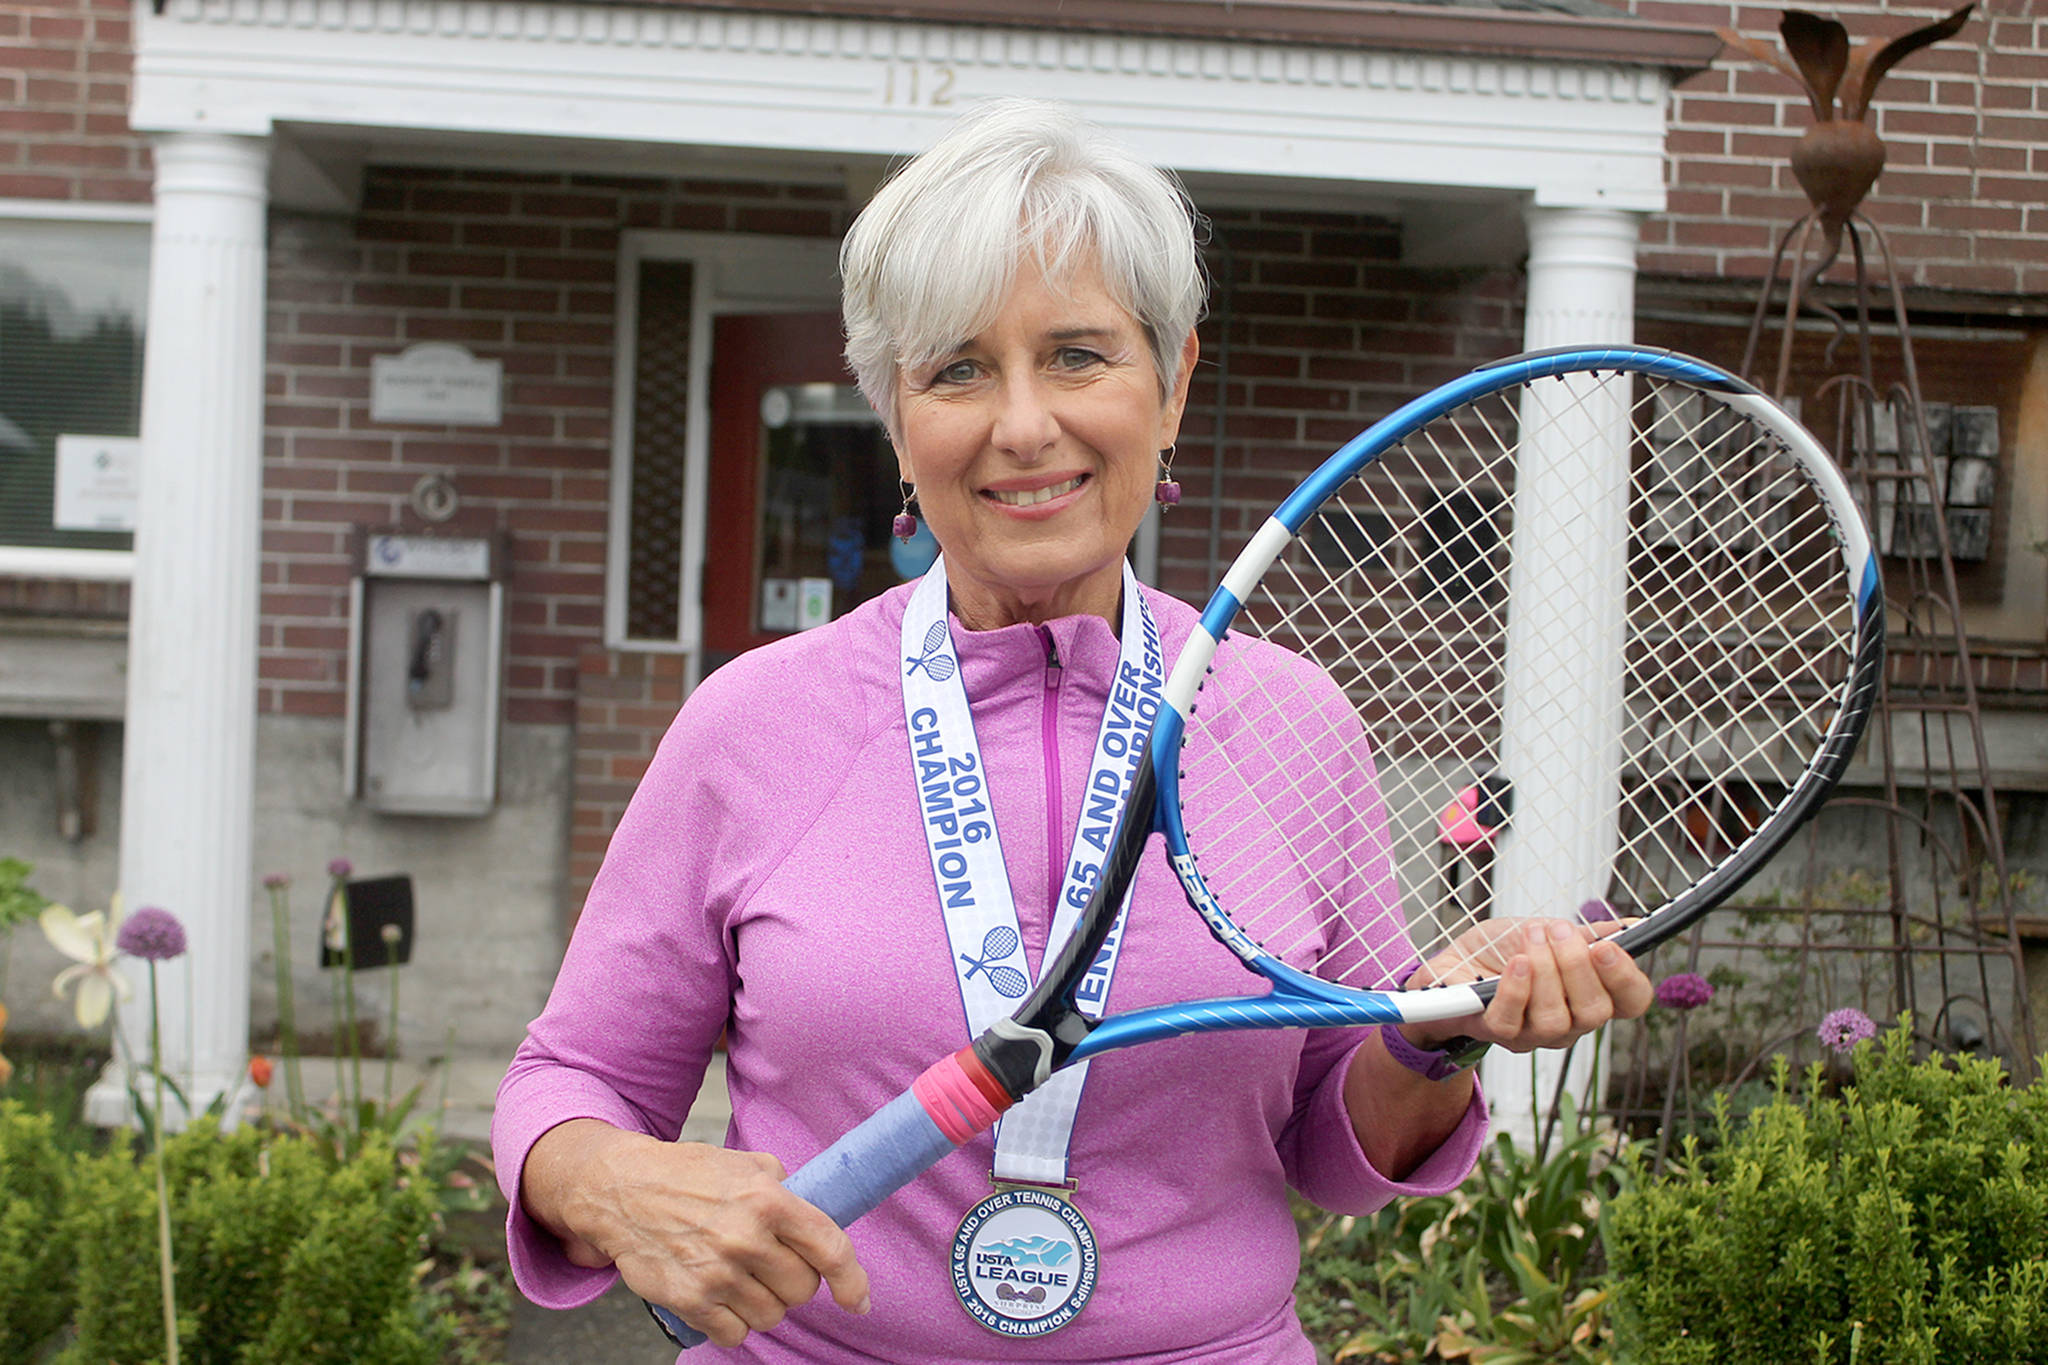 Langley city councilwoman wins national tennis championship with team